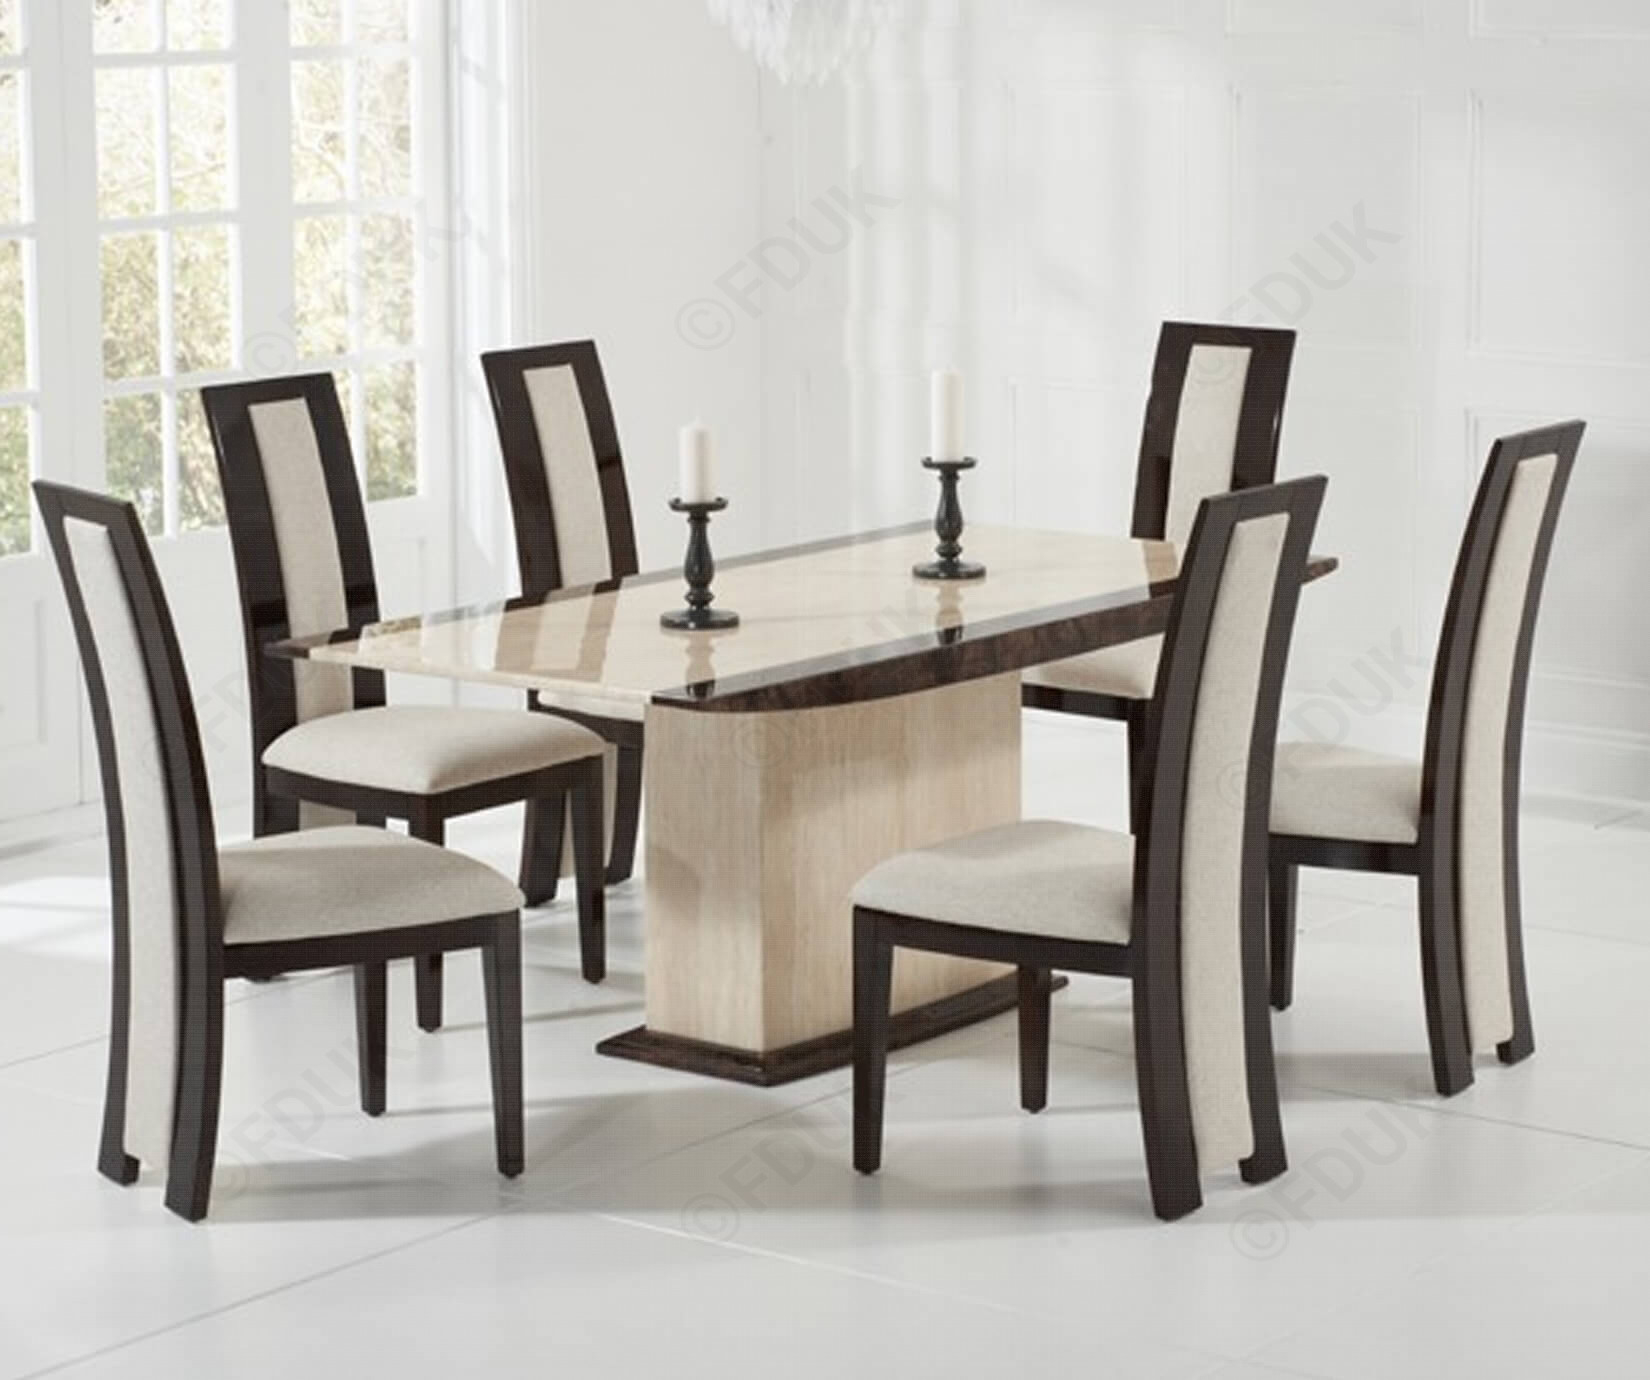 Mark Harris Alba Cream And Brown Constituted Marble Dining Set With 6 Rivilino Chairs regarding dimensions 1650 X 1380